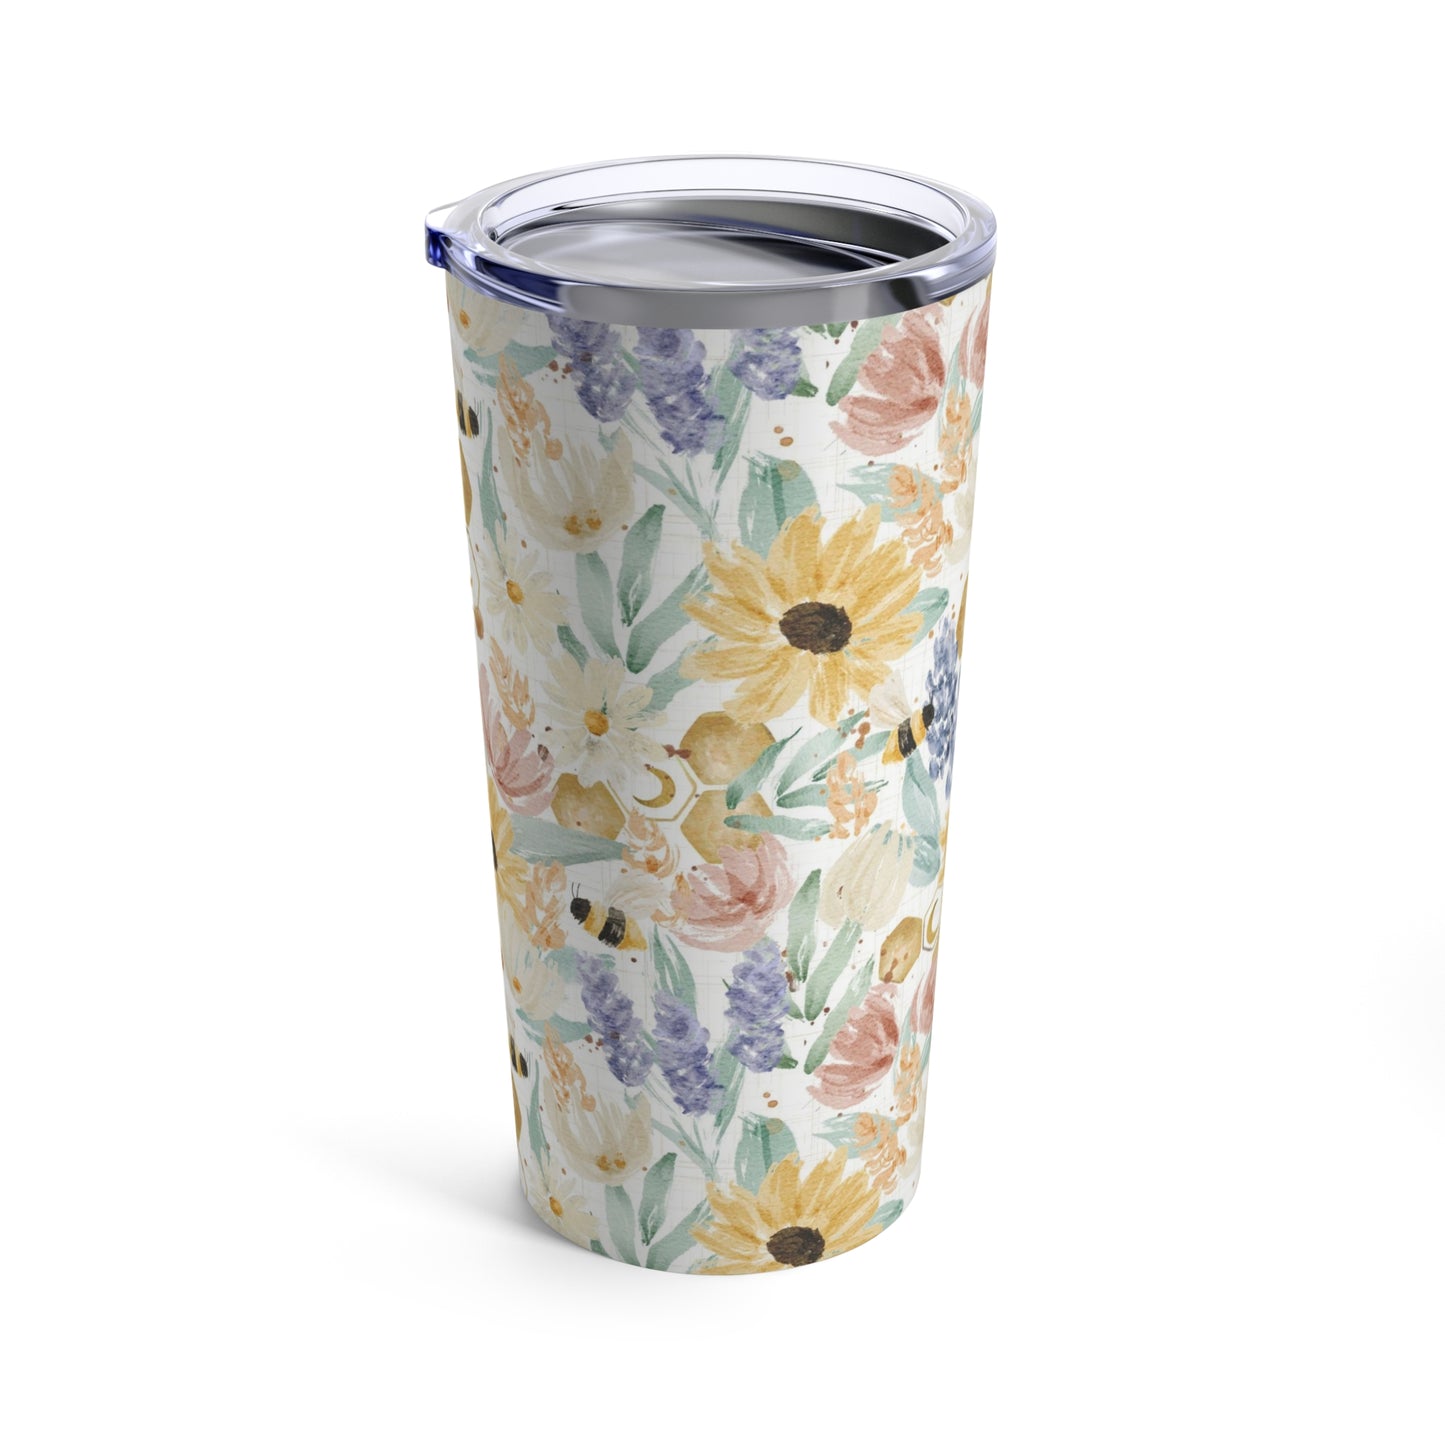 Wildflowers and bees Tumbler 20oz for gardener or wildflowers lover. Stainless travel tumbe el vacuum insulated for her.